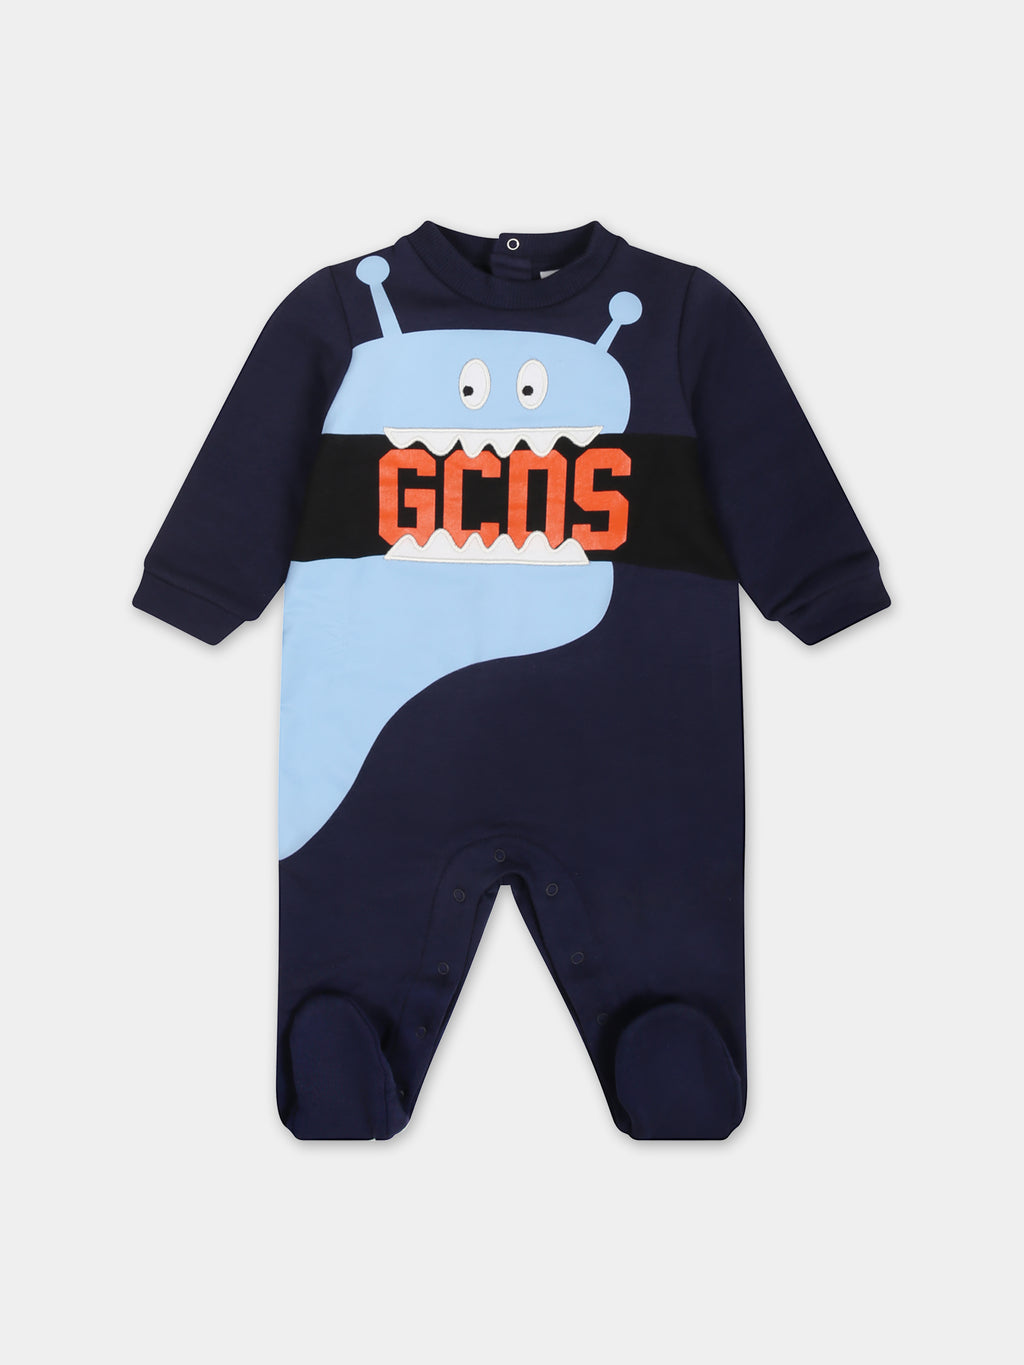 Blue baby grow for baby boy with monster and logo